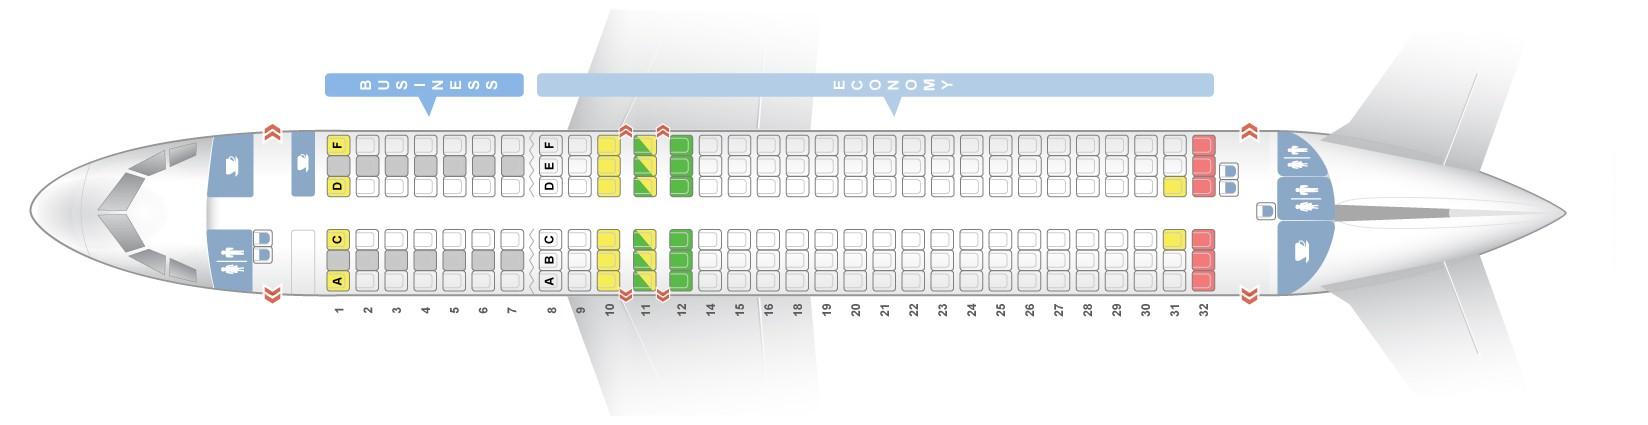 Seat map Airbus A320200Neo"Lufthansa". Best seats in the